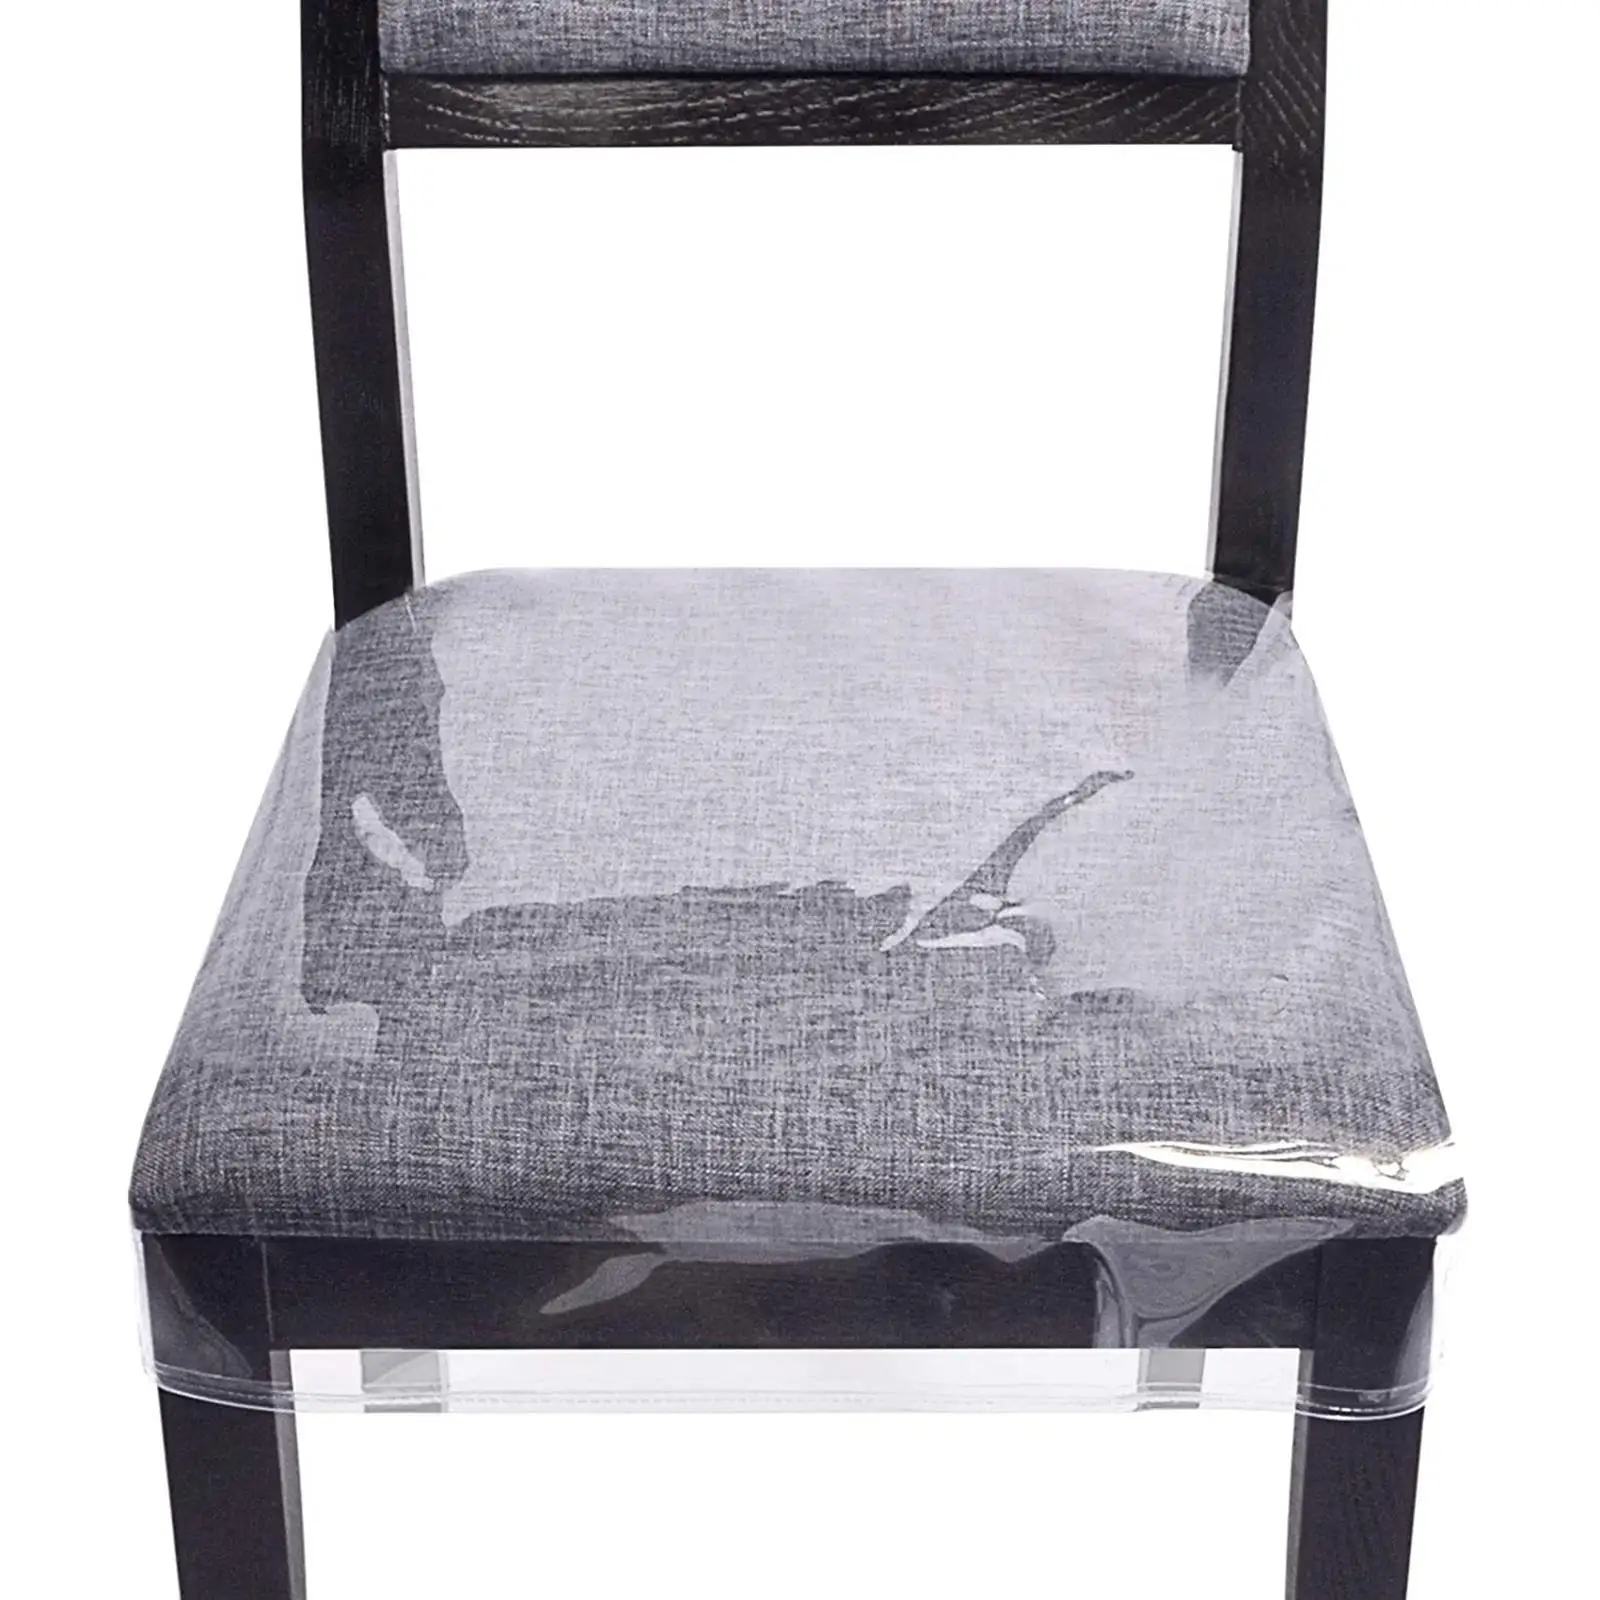 Clear Dining Chair Cover Waterproof with Strap Scratch Resistant Chair Cover for Dining Room Kids Seat Slipcover Chair Slipcover